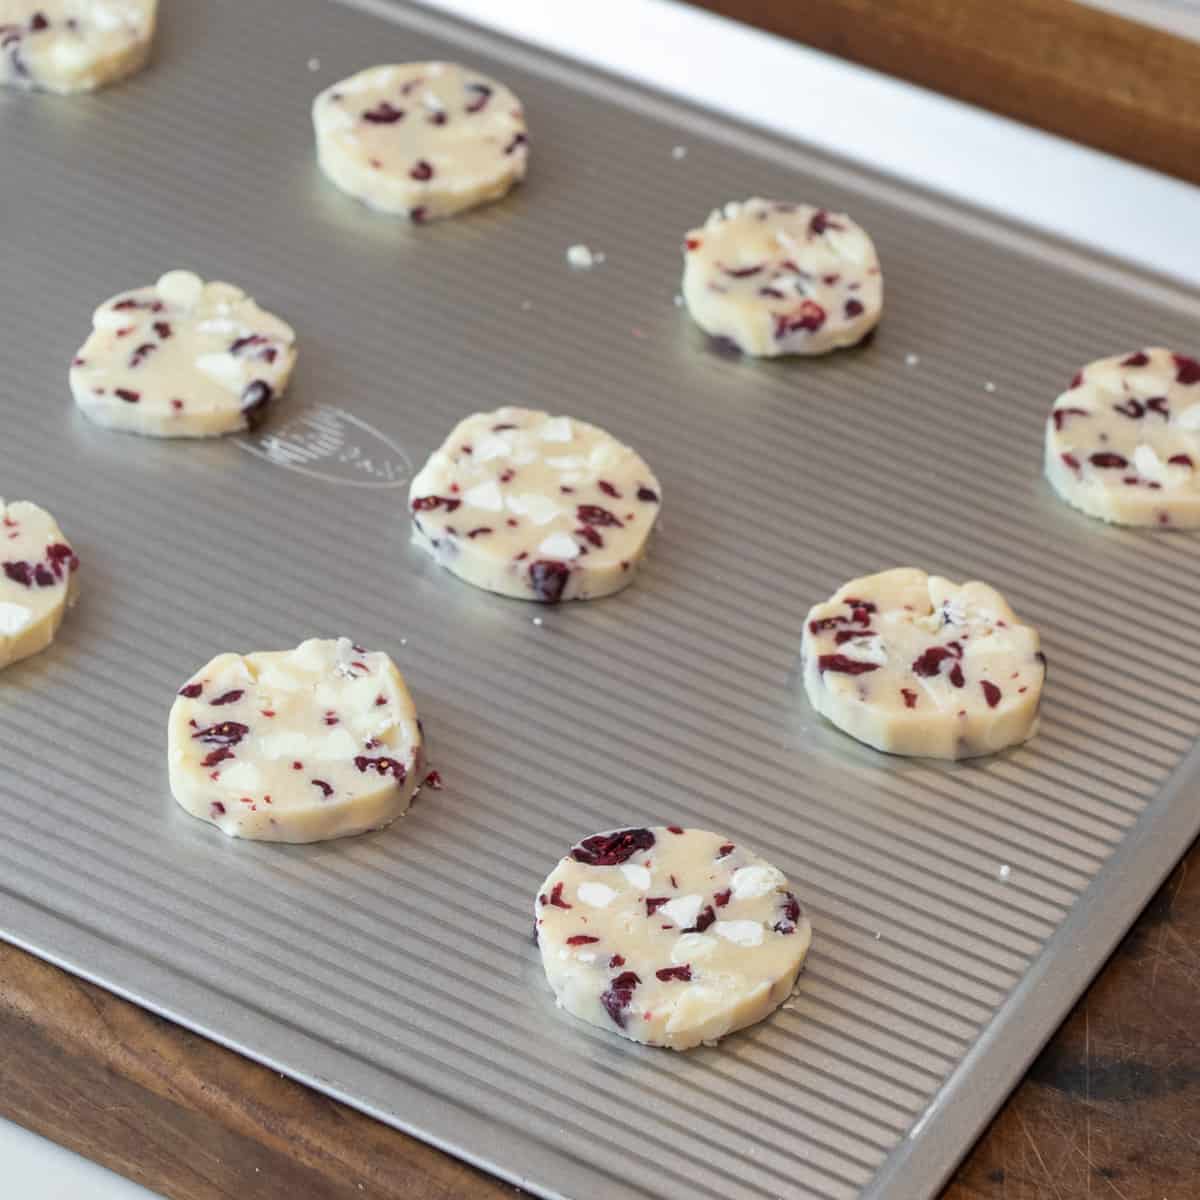 Unbaked cookies placed on a baking sheet.